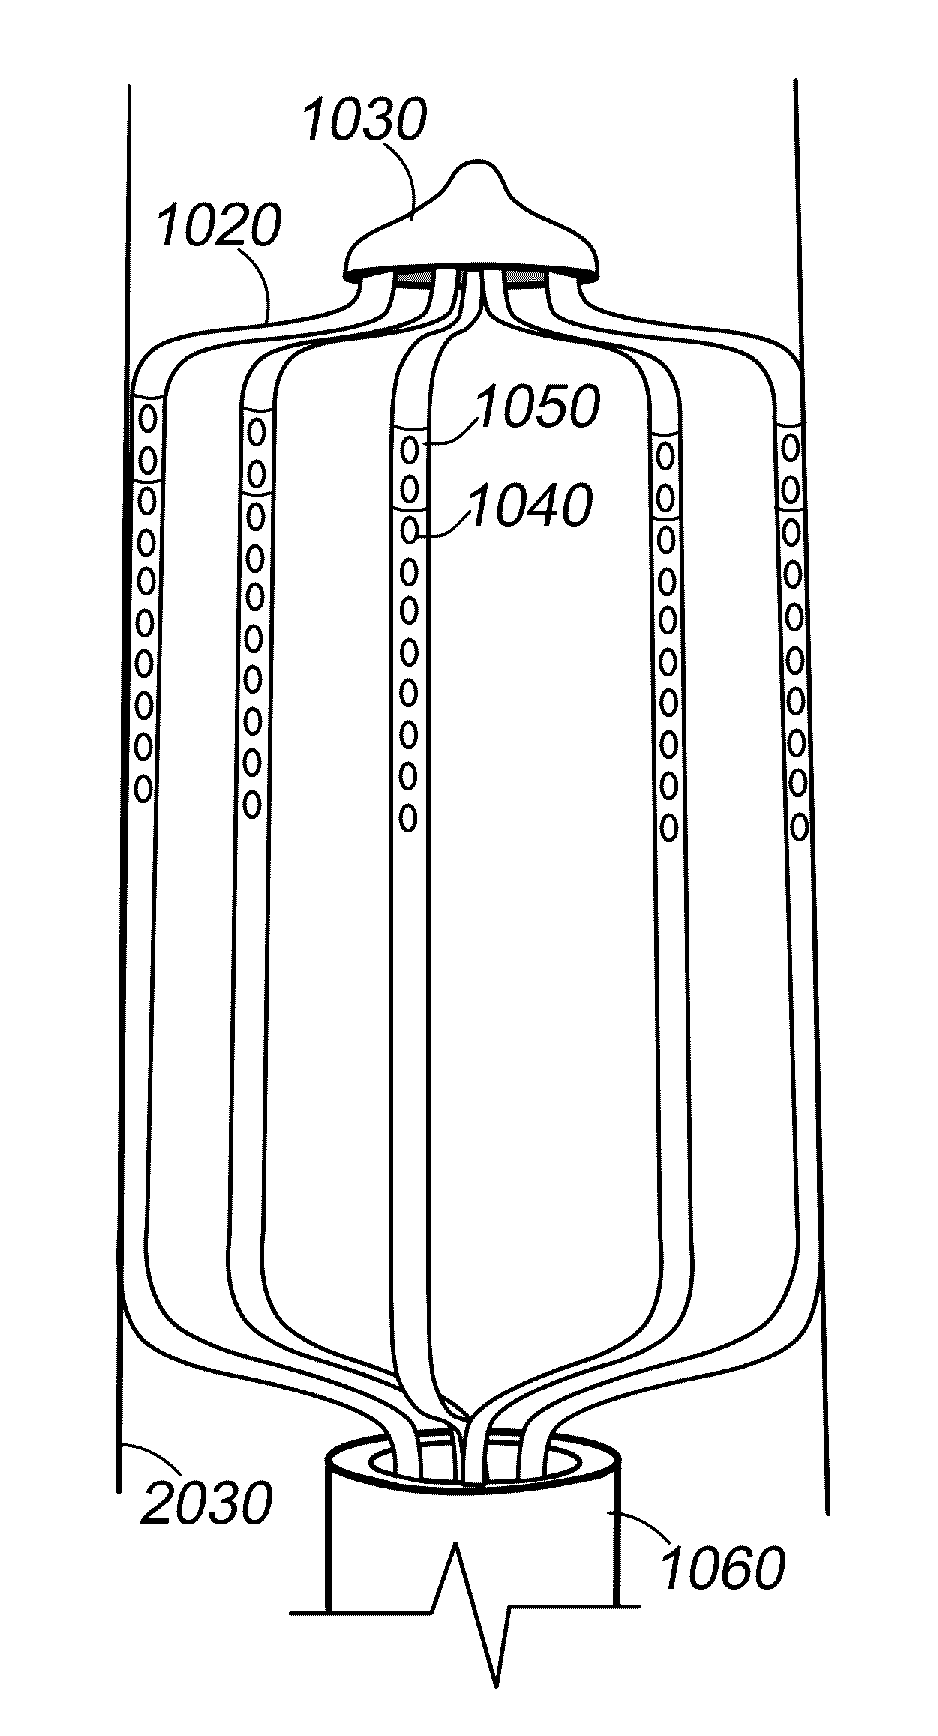 Apparatus and method for assessing tissue composition